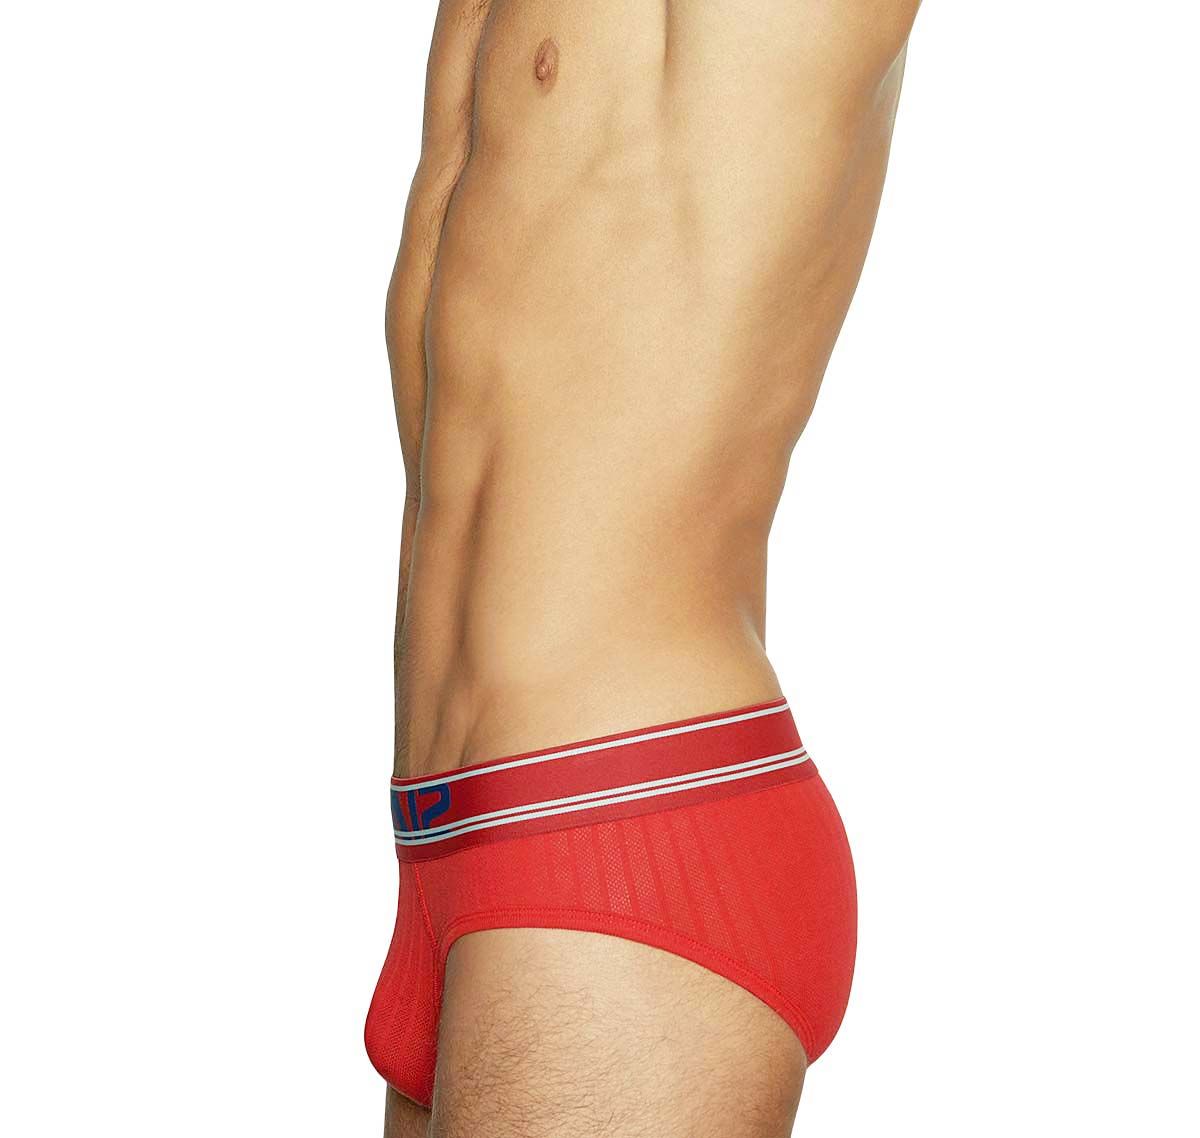 C-IN2 Brief TACKLE LOW RISE BRIEF, red